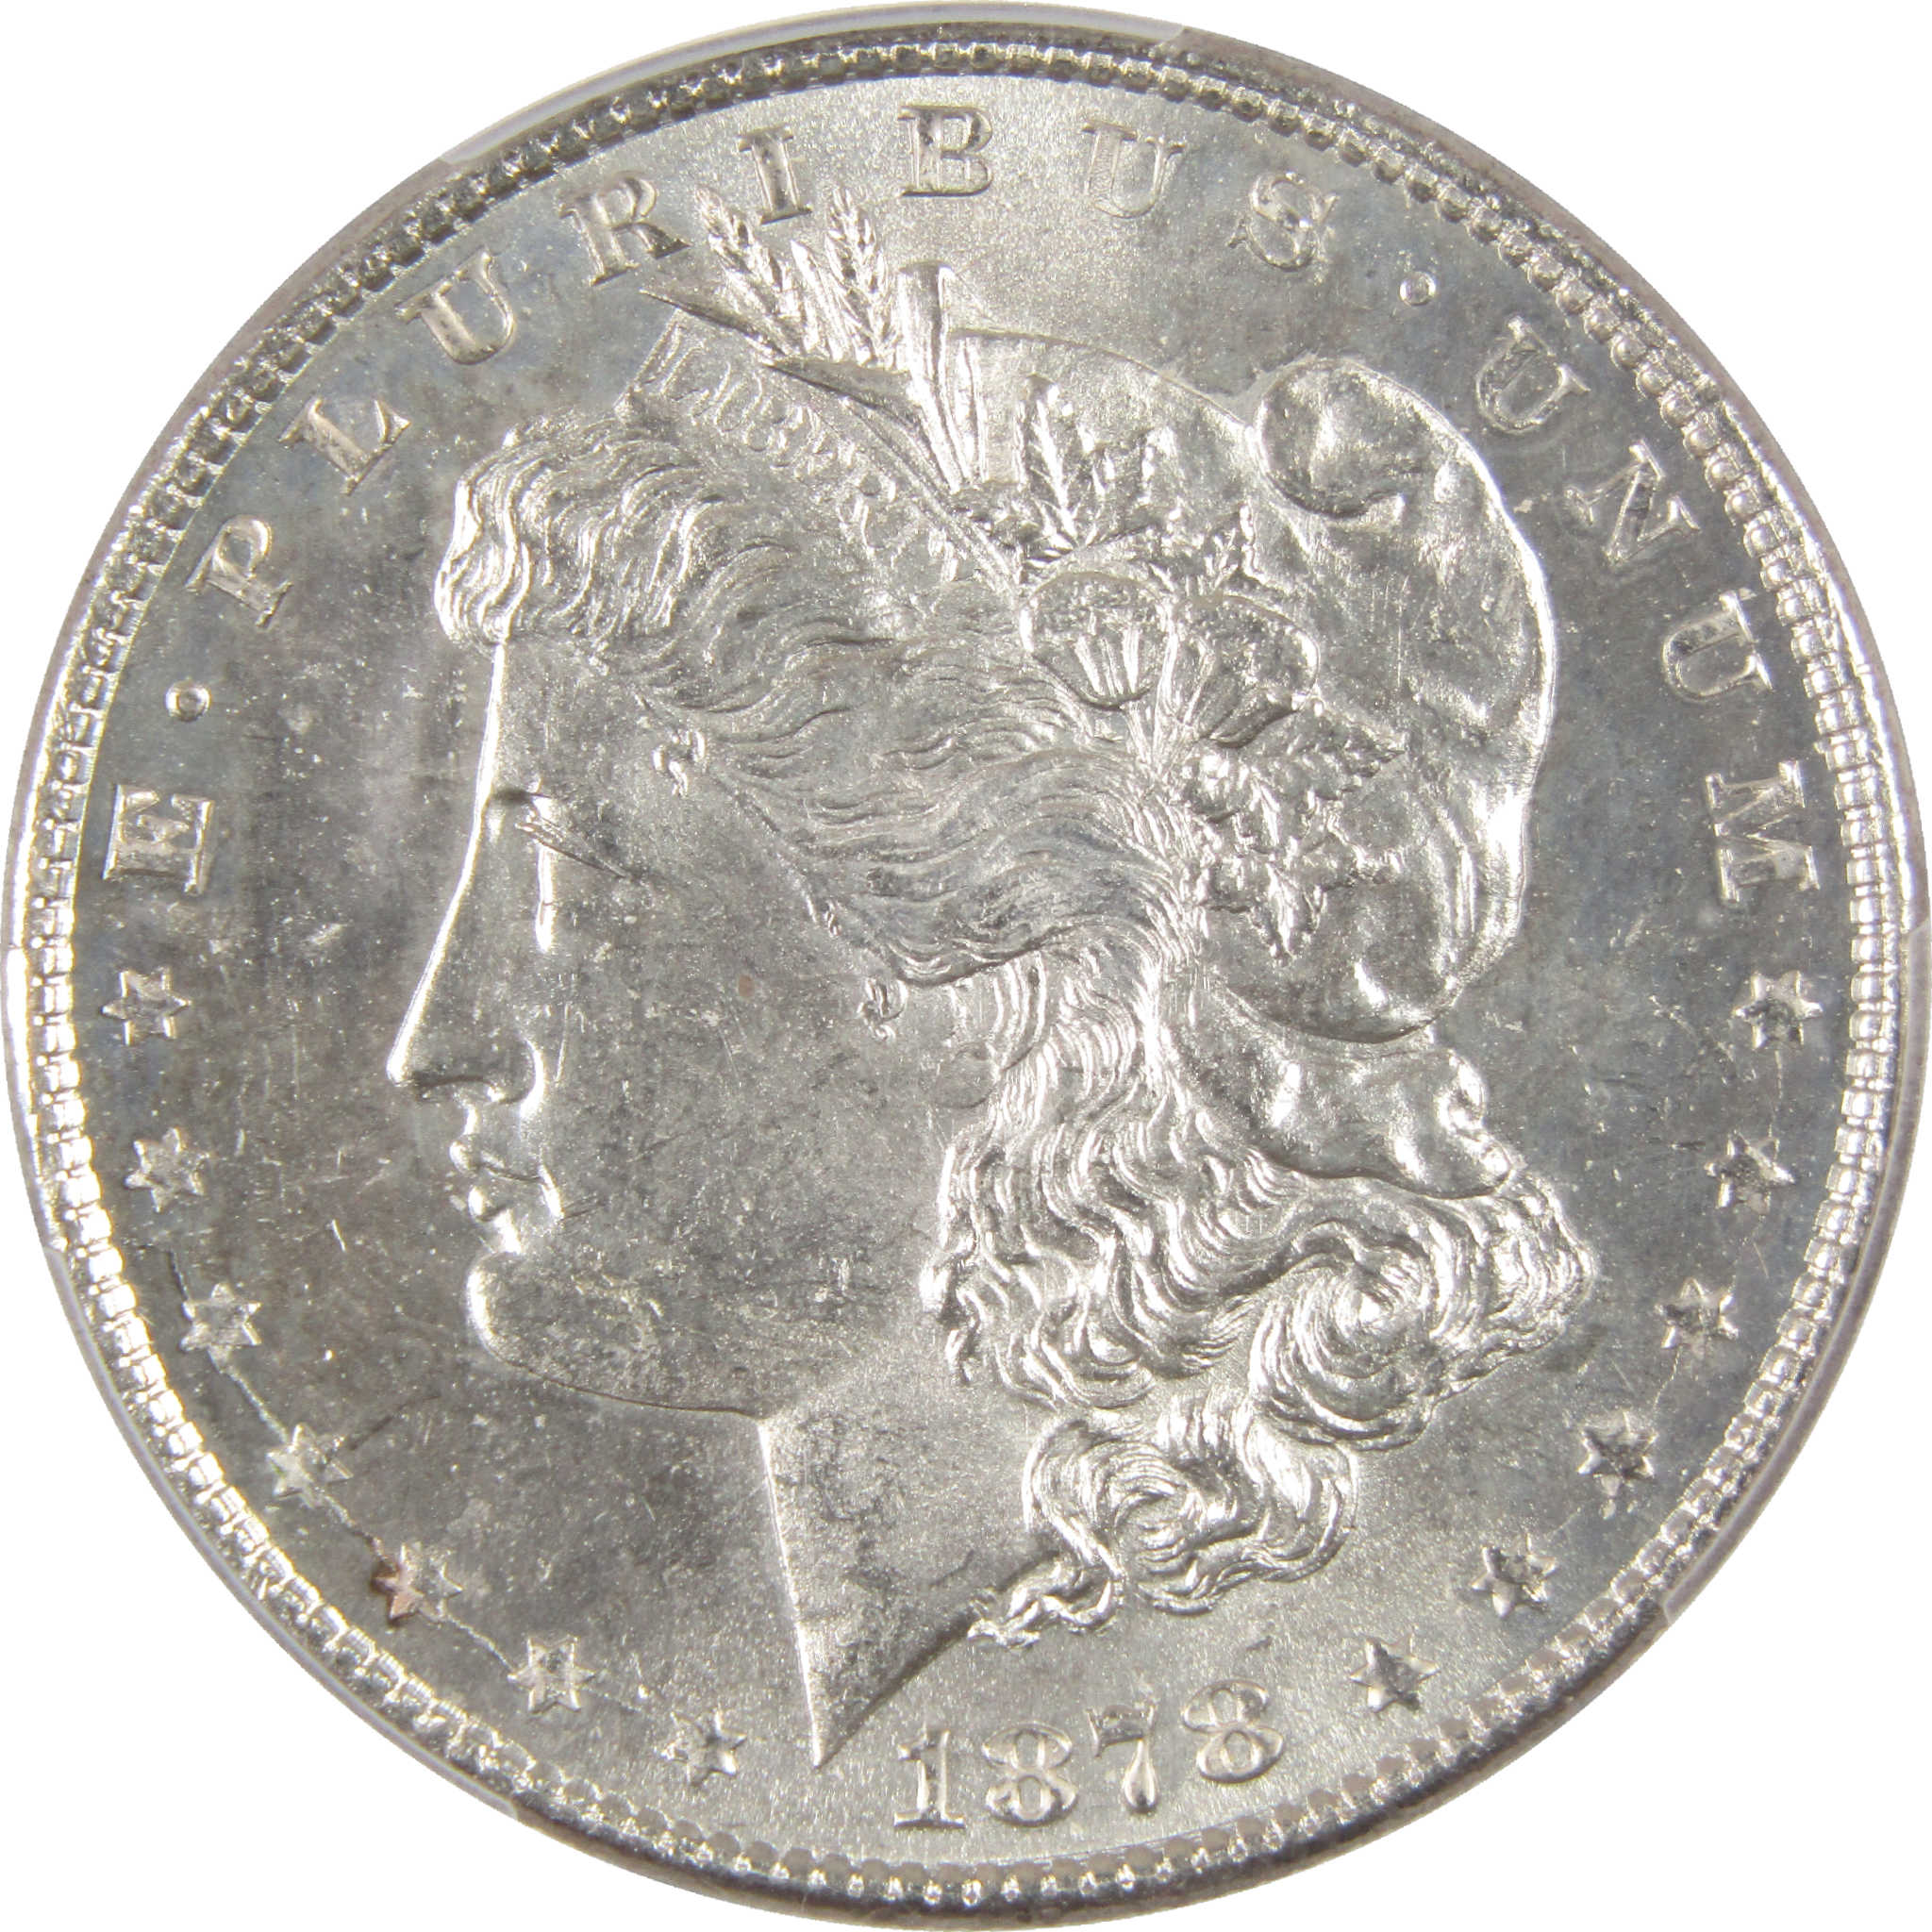 1878 8TF Morgan Dollar MS 63 PCGS Silver $1 Uncirculated SKU:I11336 - Morgan coin - Morgan silver dollar - Morgan silver dollar for sale - Profile Coins &amp; Collectibles